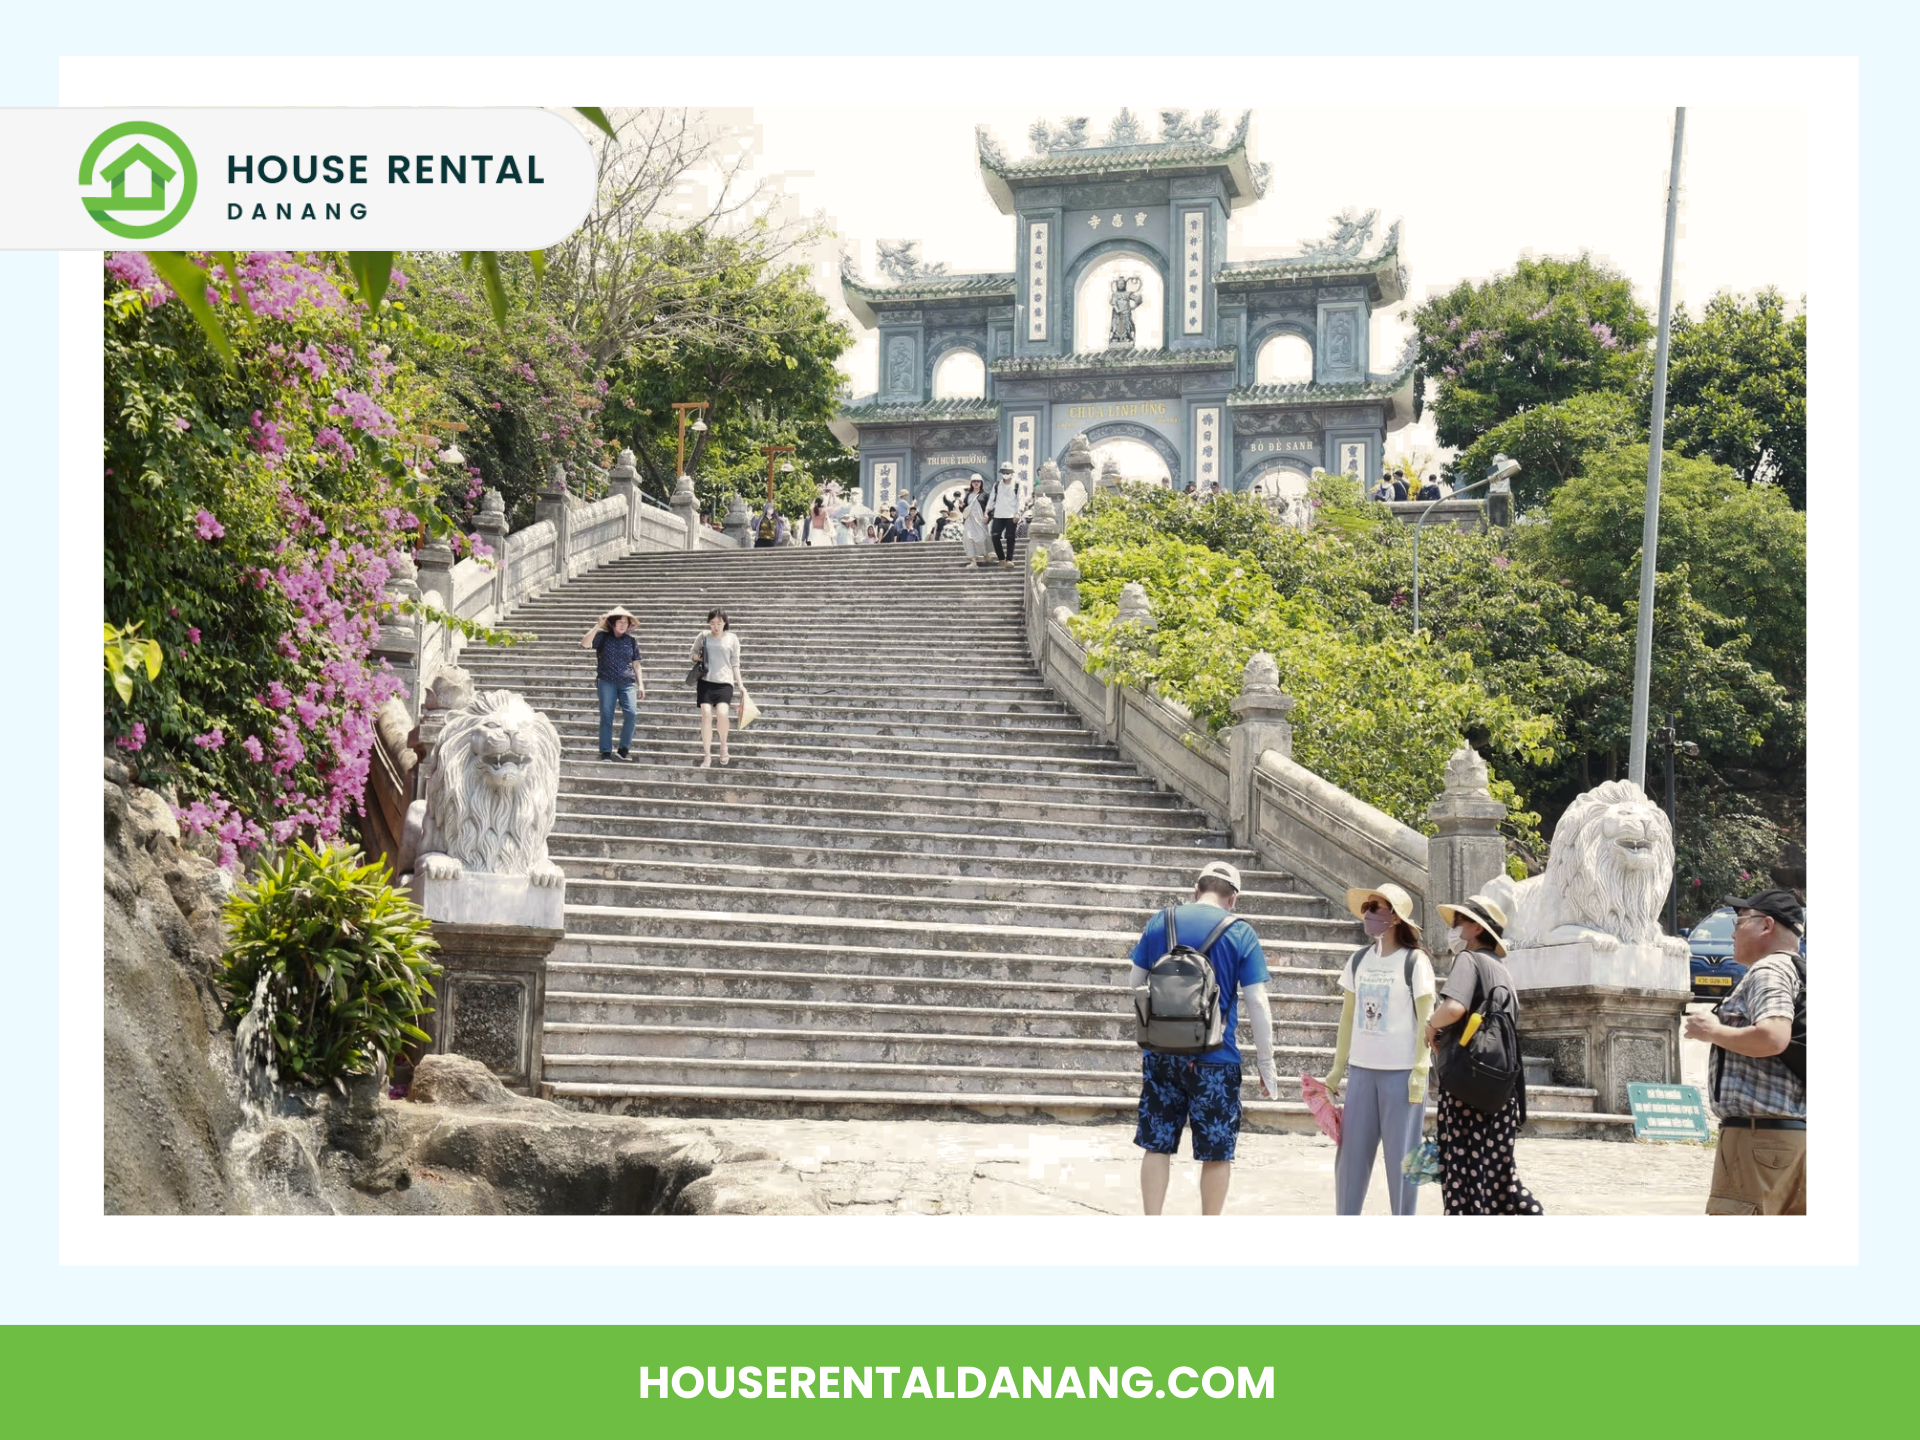 A stone staircase leading to a traditional archway at Linh Ung Pagoda, with tourists walking and taking photos. The area is surrounded by greenery and has statues of lions on either side of the stairs.